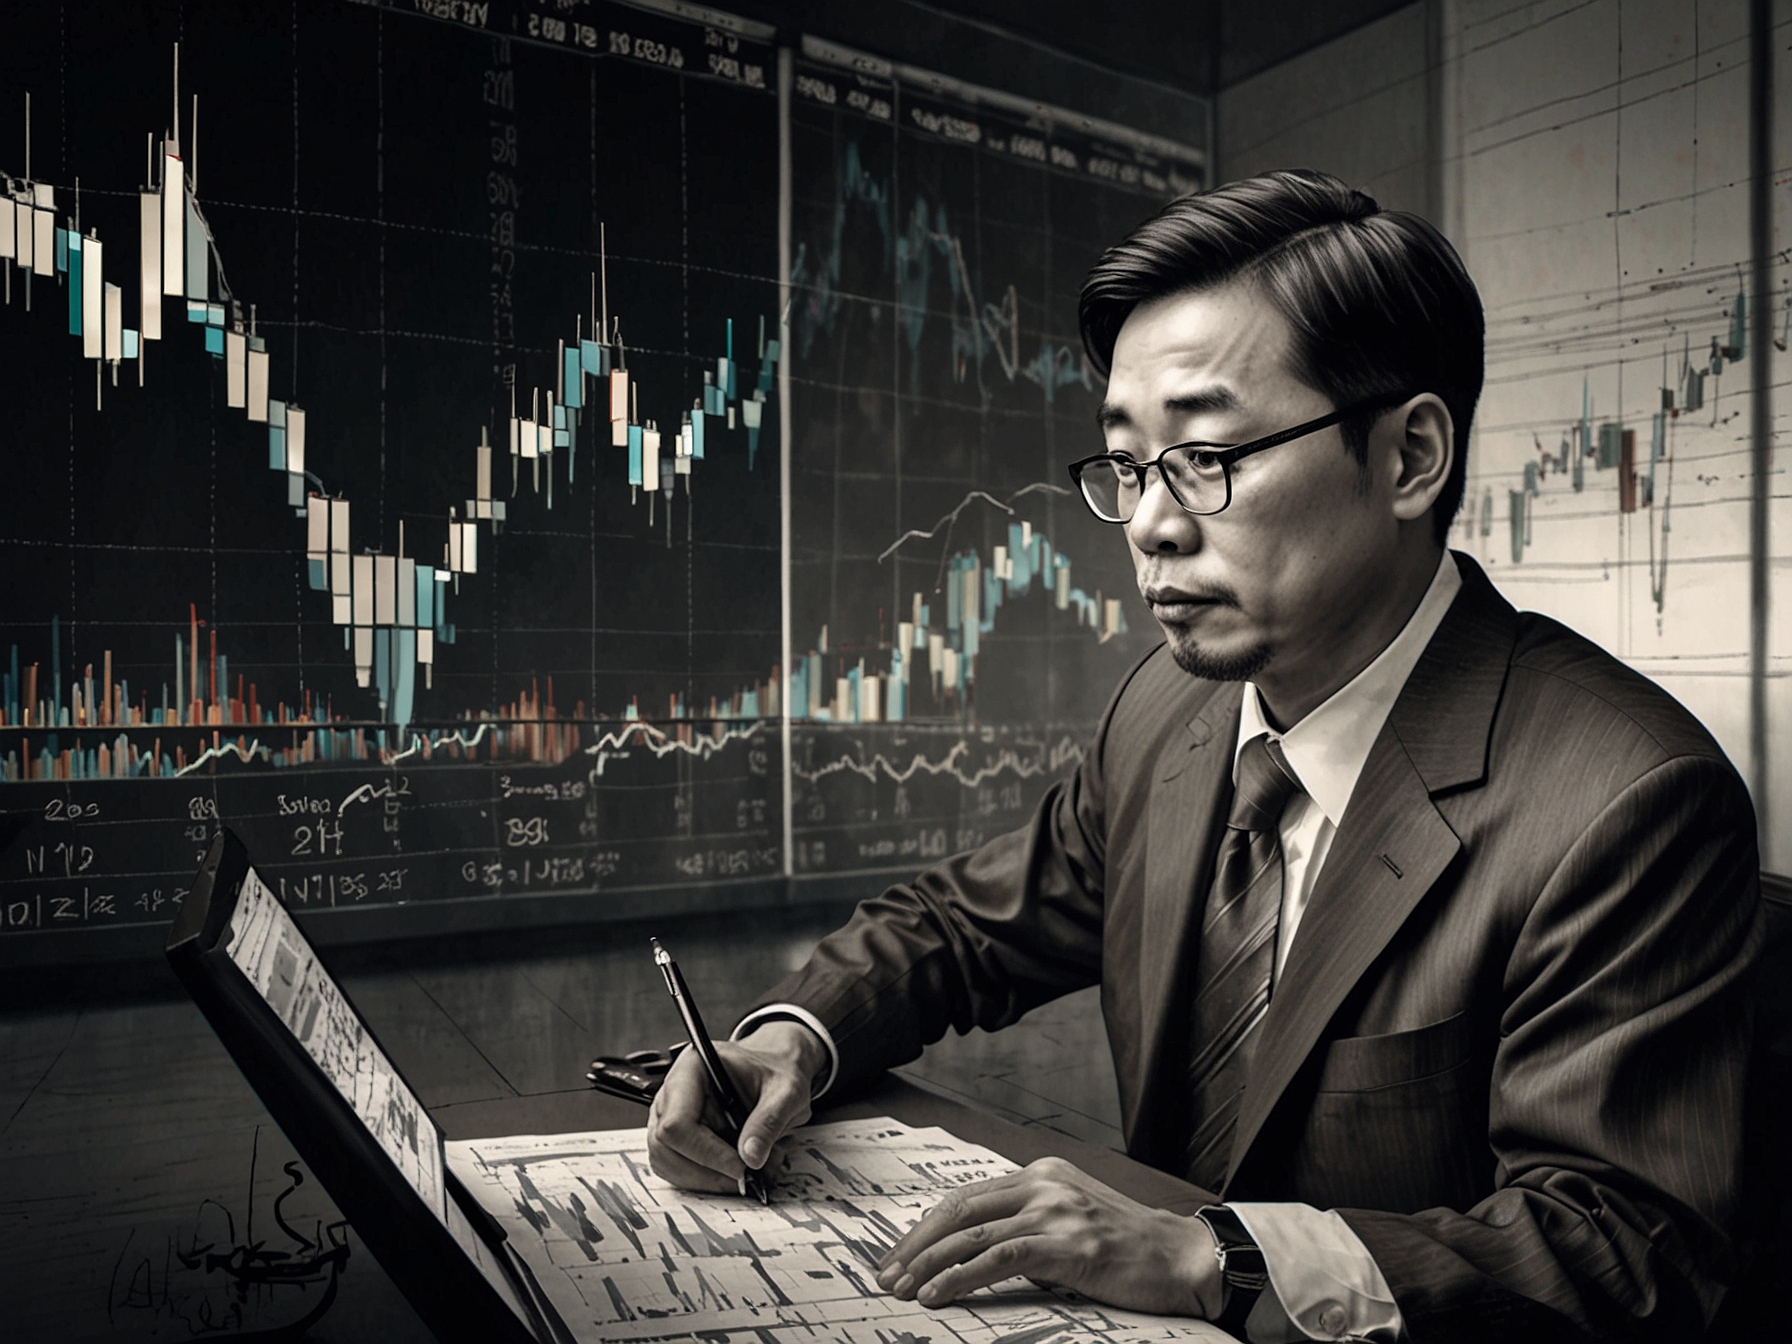 An illustration of an investor analyzing market charts, reflecting the anticipation of Chinese economic data that could influence the Asian financial markets significantly.